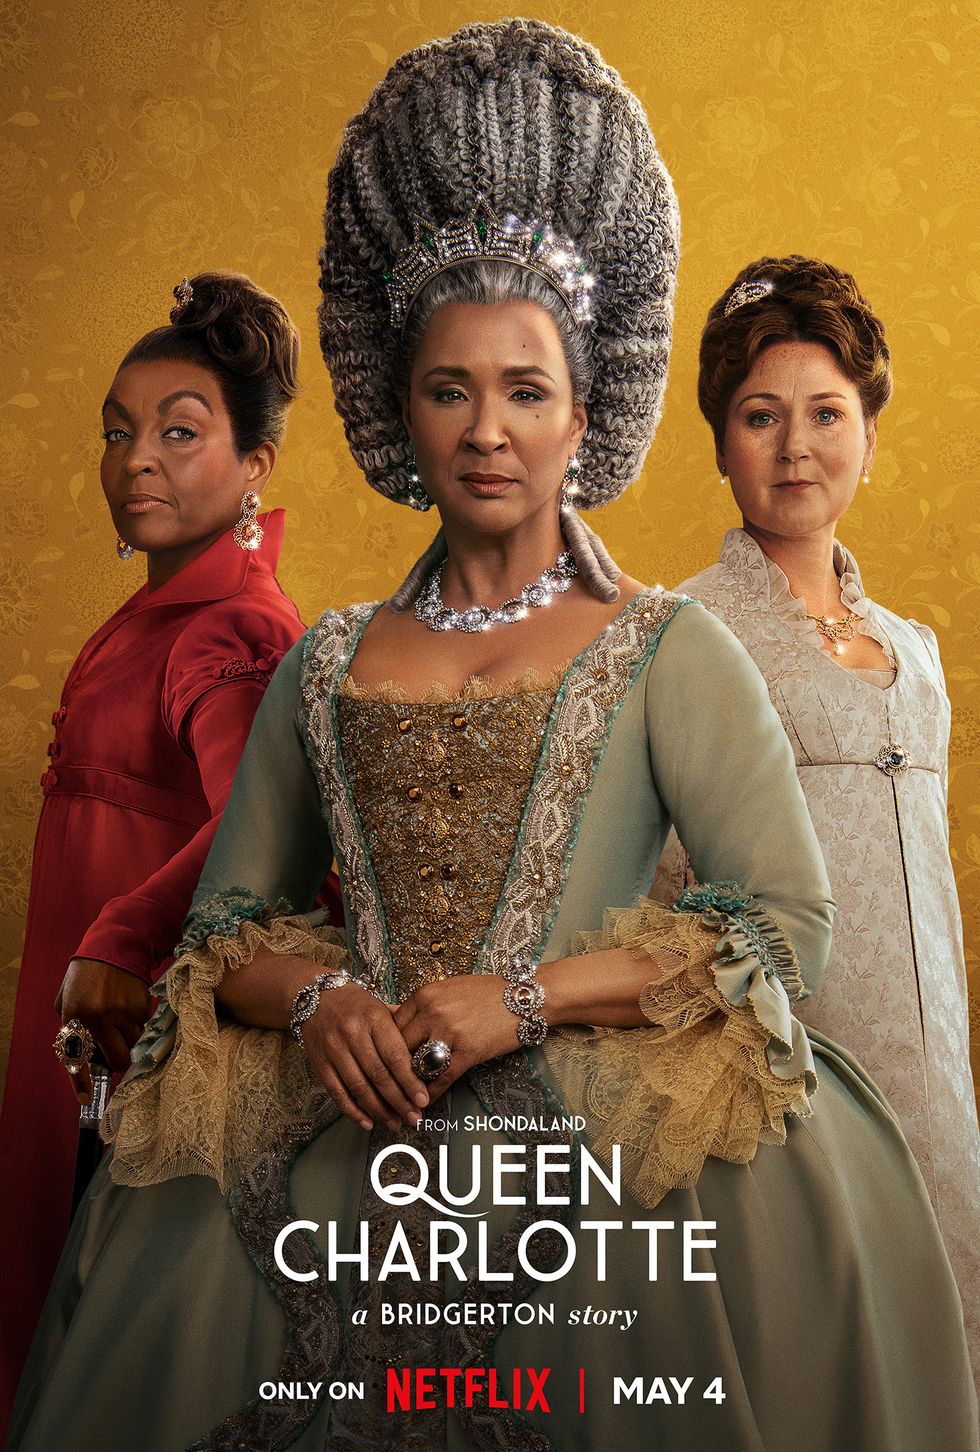 adjoa andoh as lady danbury, golda rohshevuel as queen charlotte, and ruth gemmell as lady violet bridgerton in 'queen charlotte a bridgerton story'